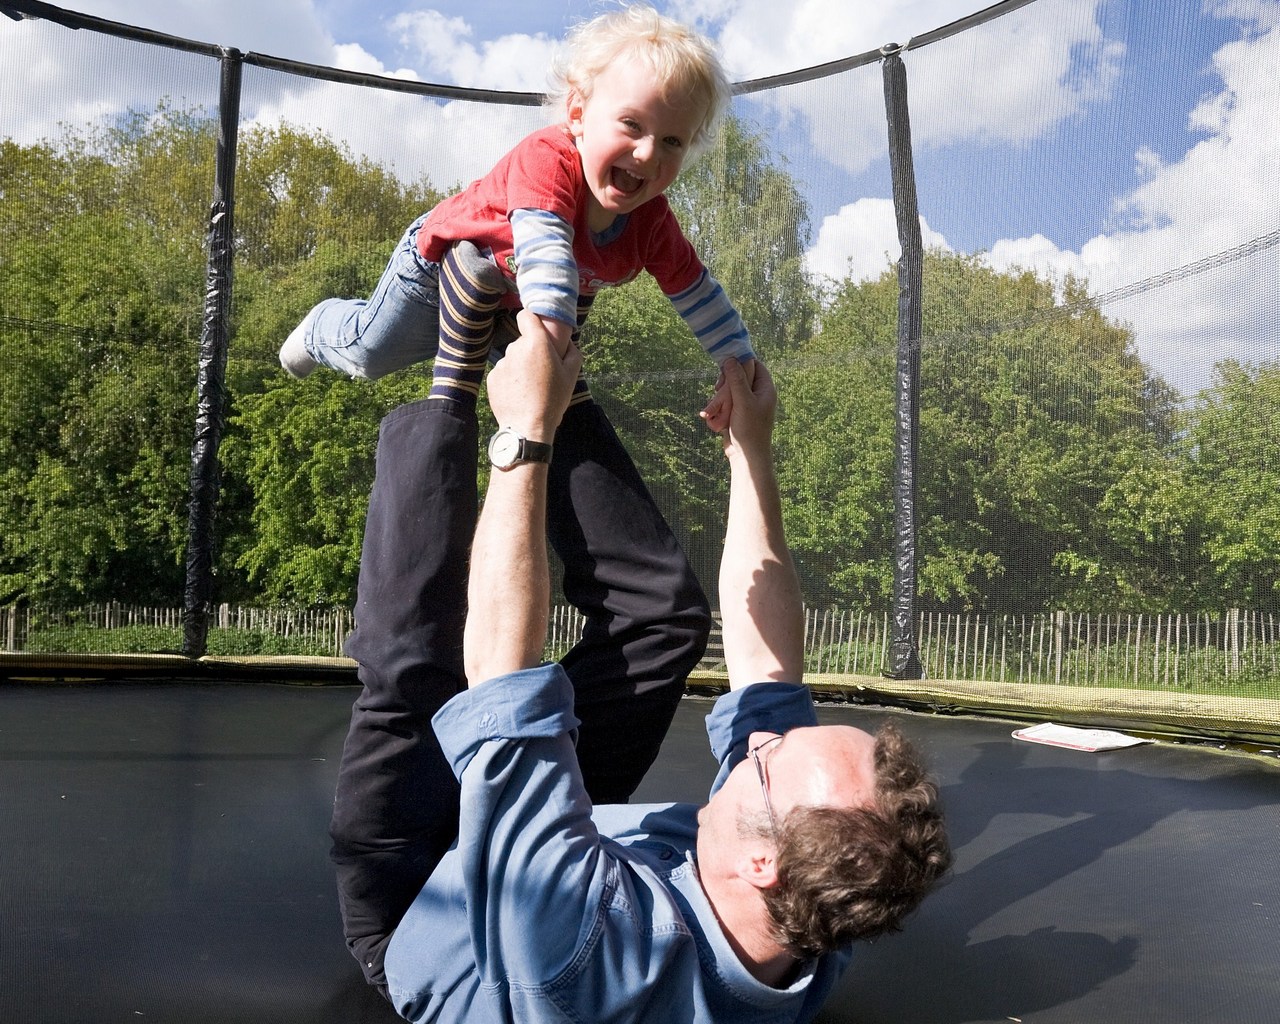 SdM_Charlie laughing on trampoline with Daddy_1280x1024